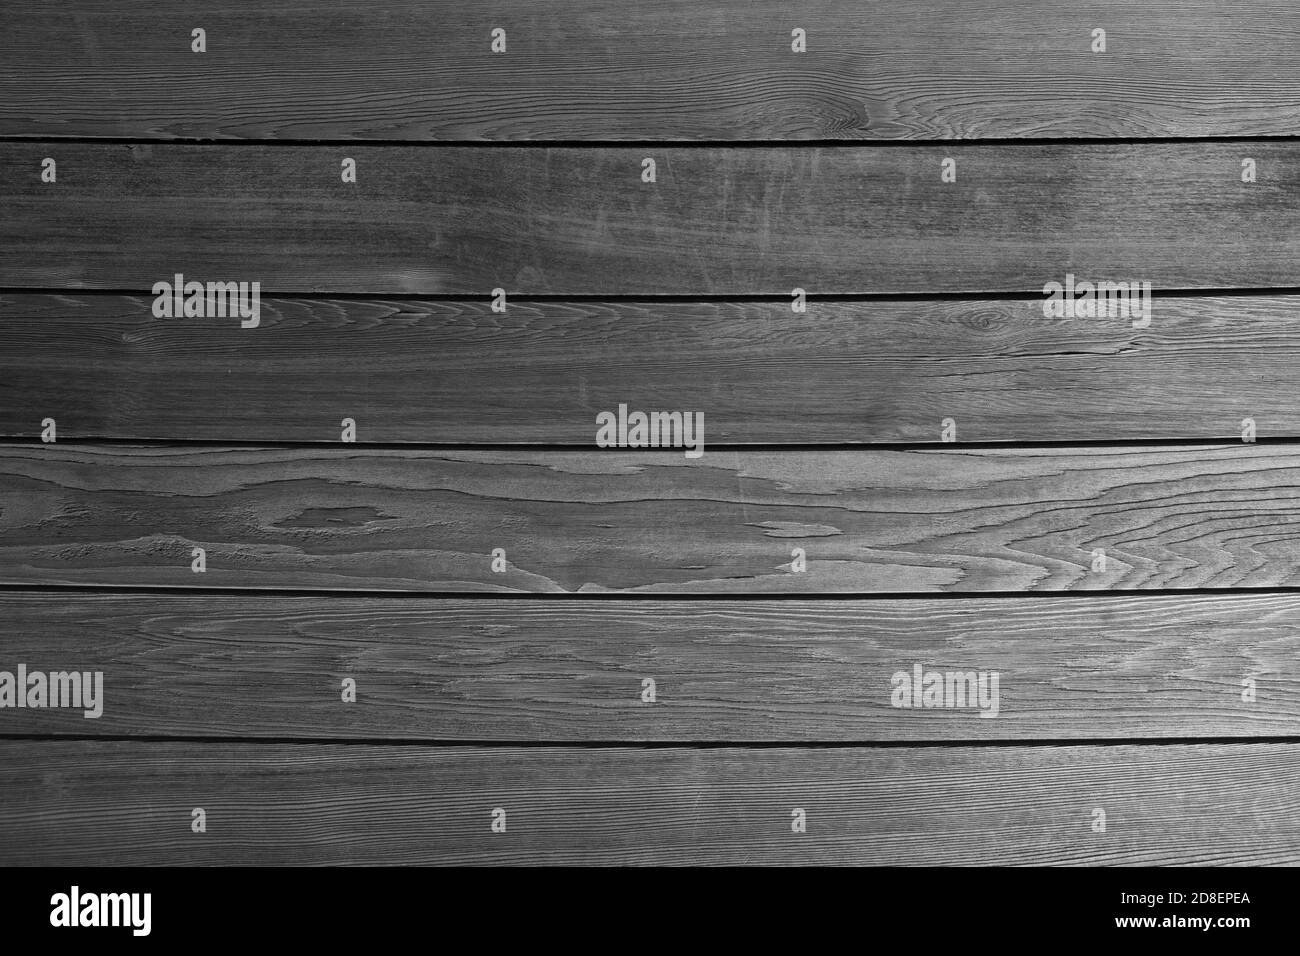 Table top Black and White Stock Photos & Images - Alamy